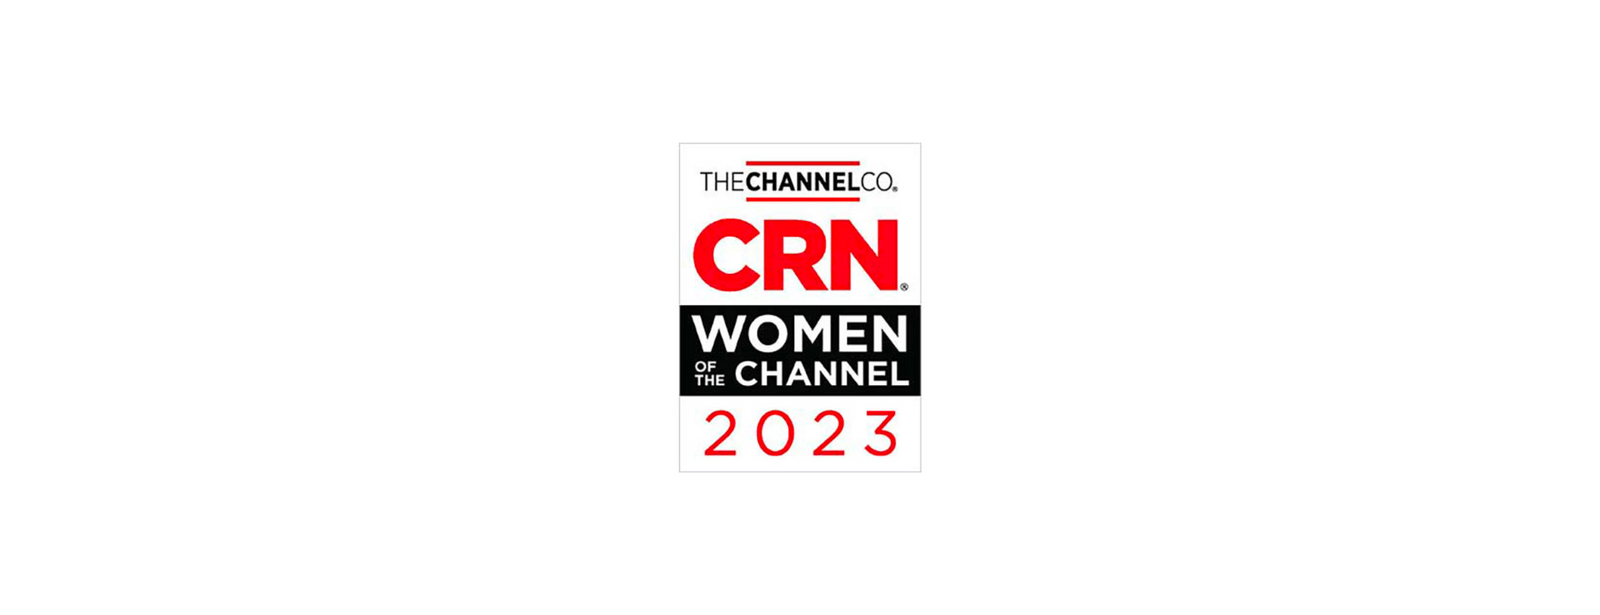 CRN NAMES THREE DNSFILTER LEADERS TO ITS 2023 WOMEN OF THE CHANNEL